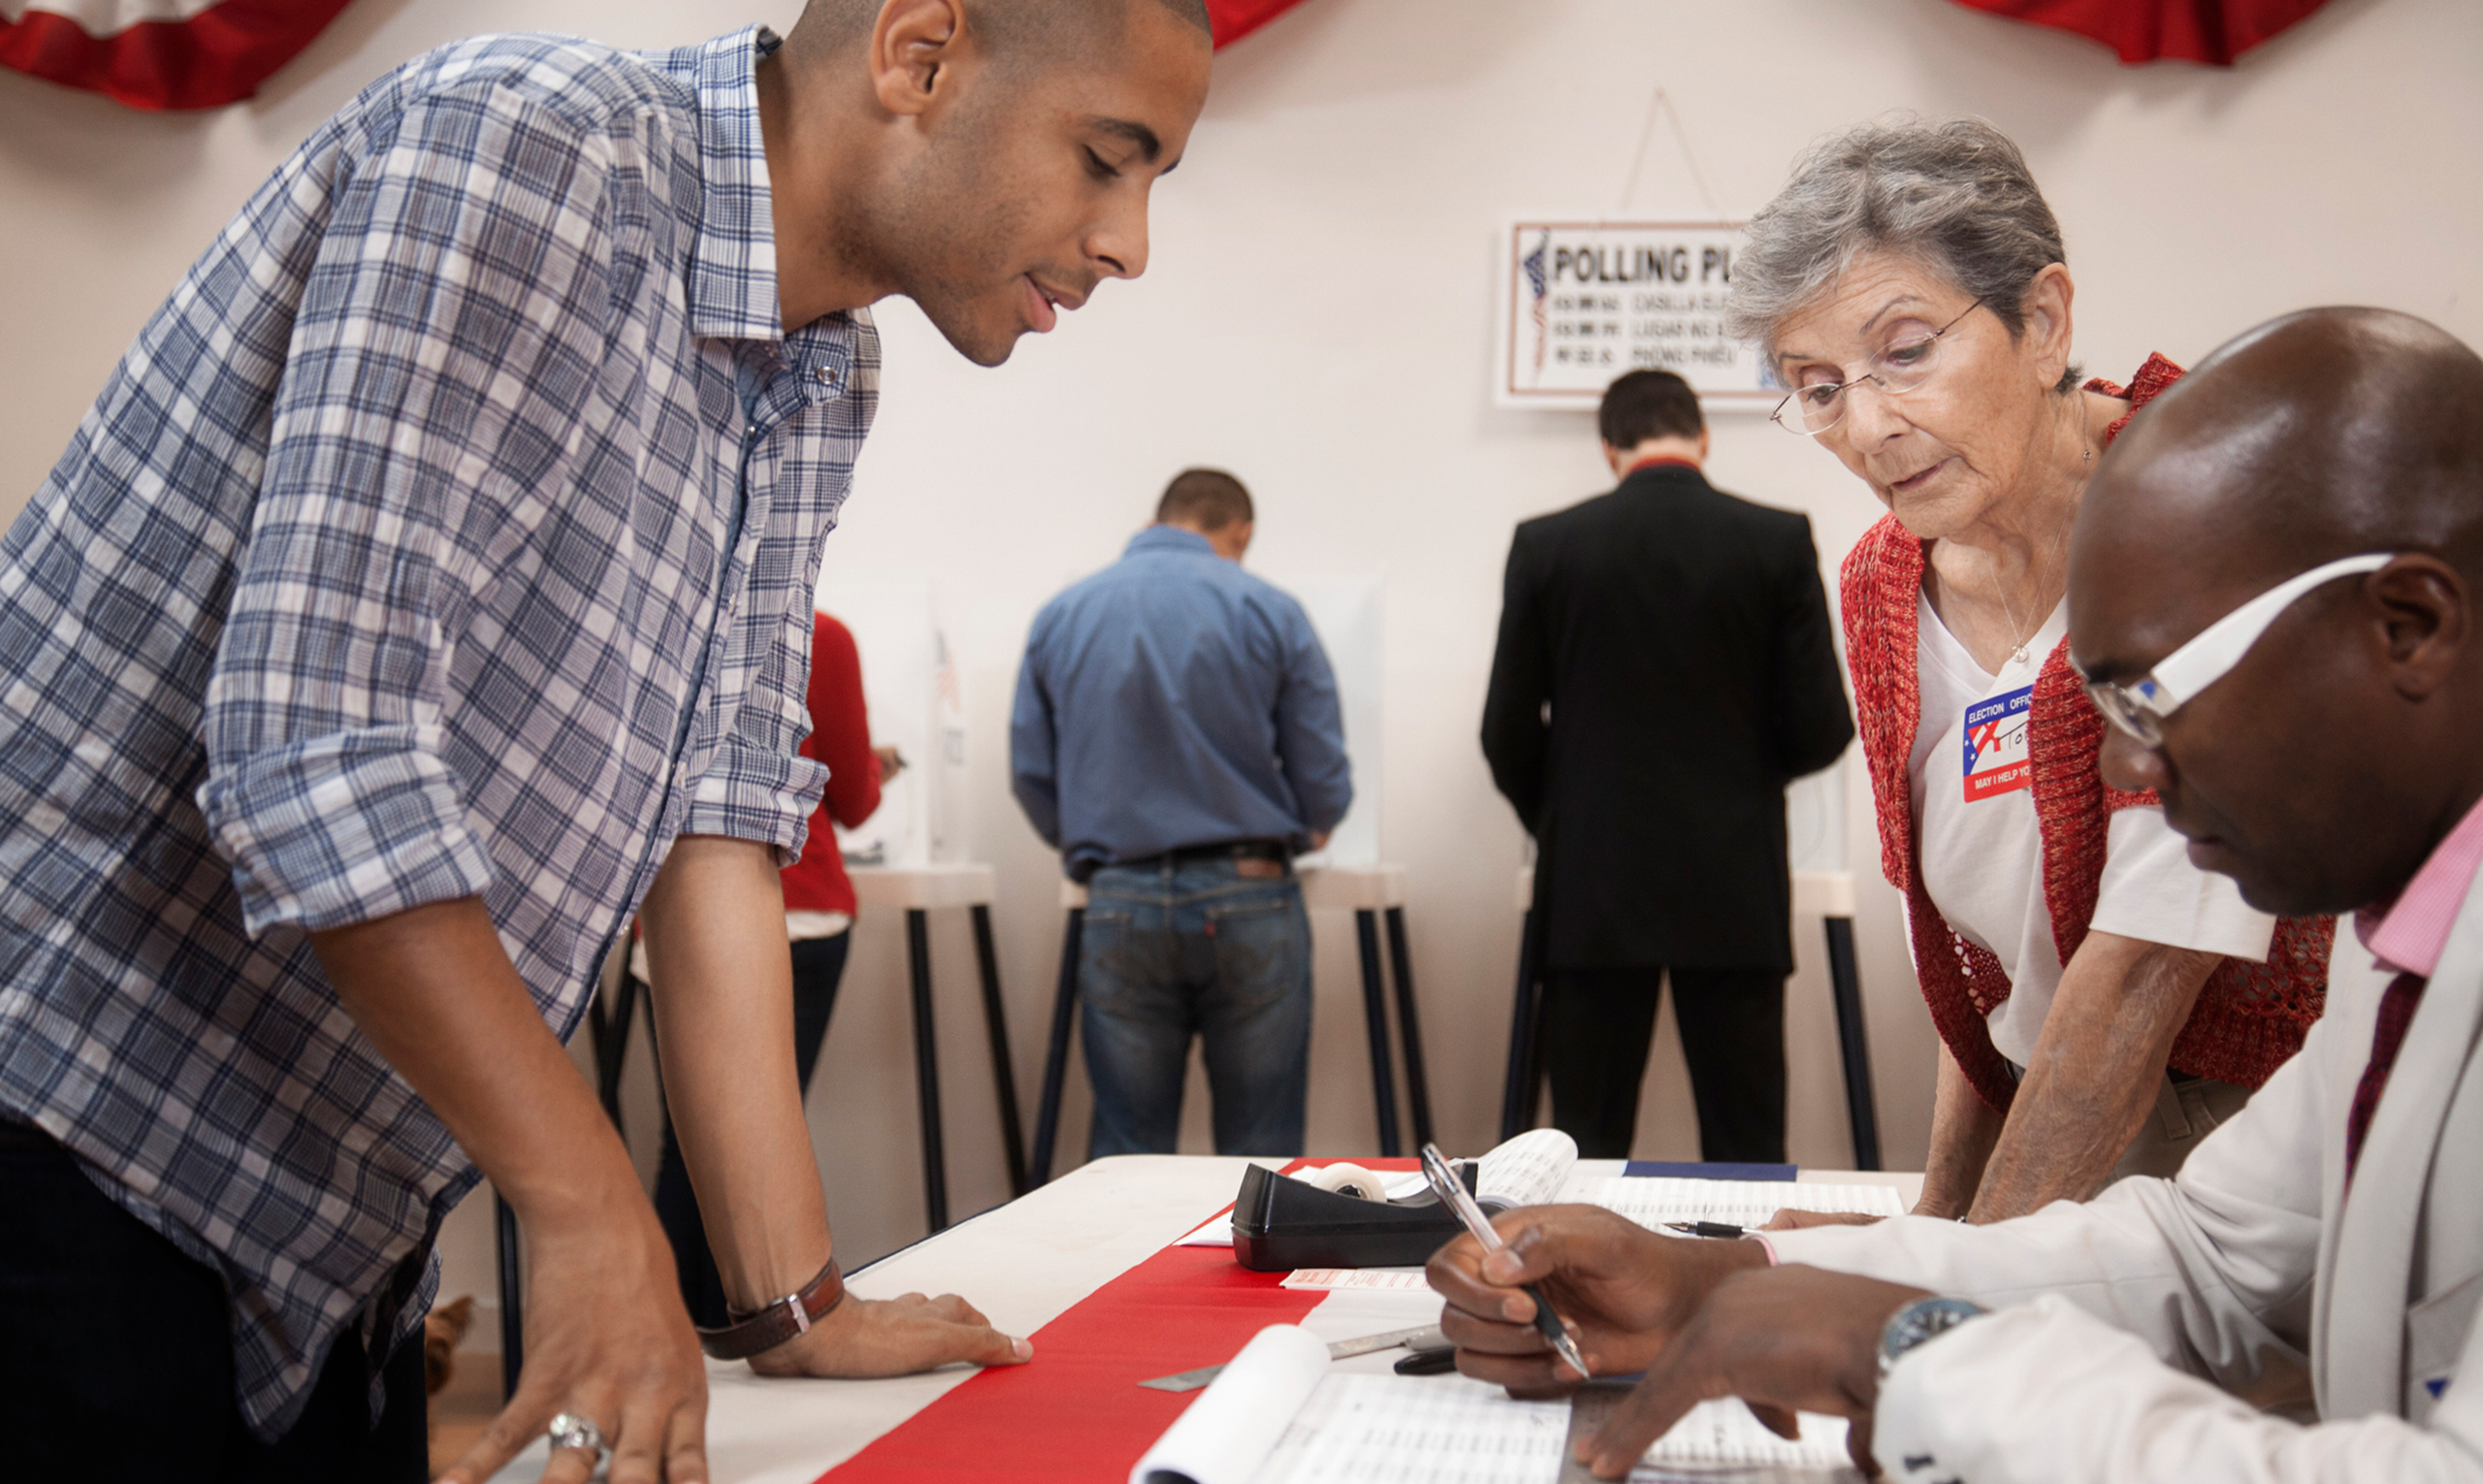 Pollworkers check a man's voter registration status while other people fill out their ballots in the background.